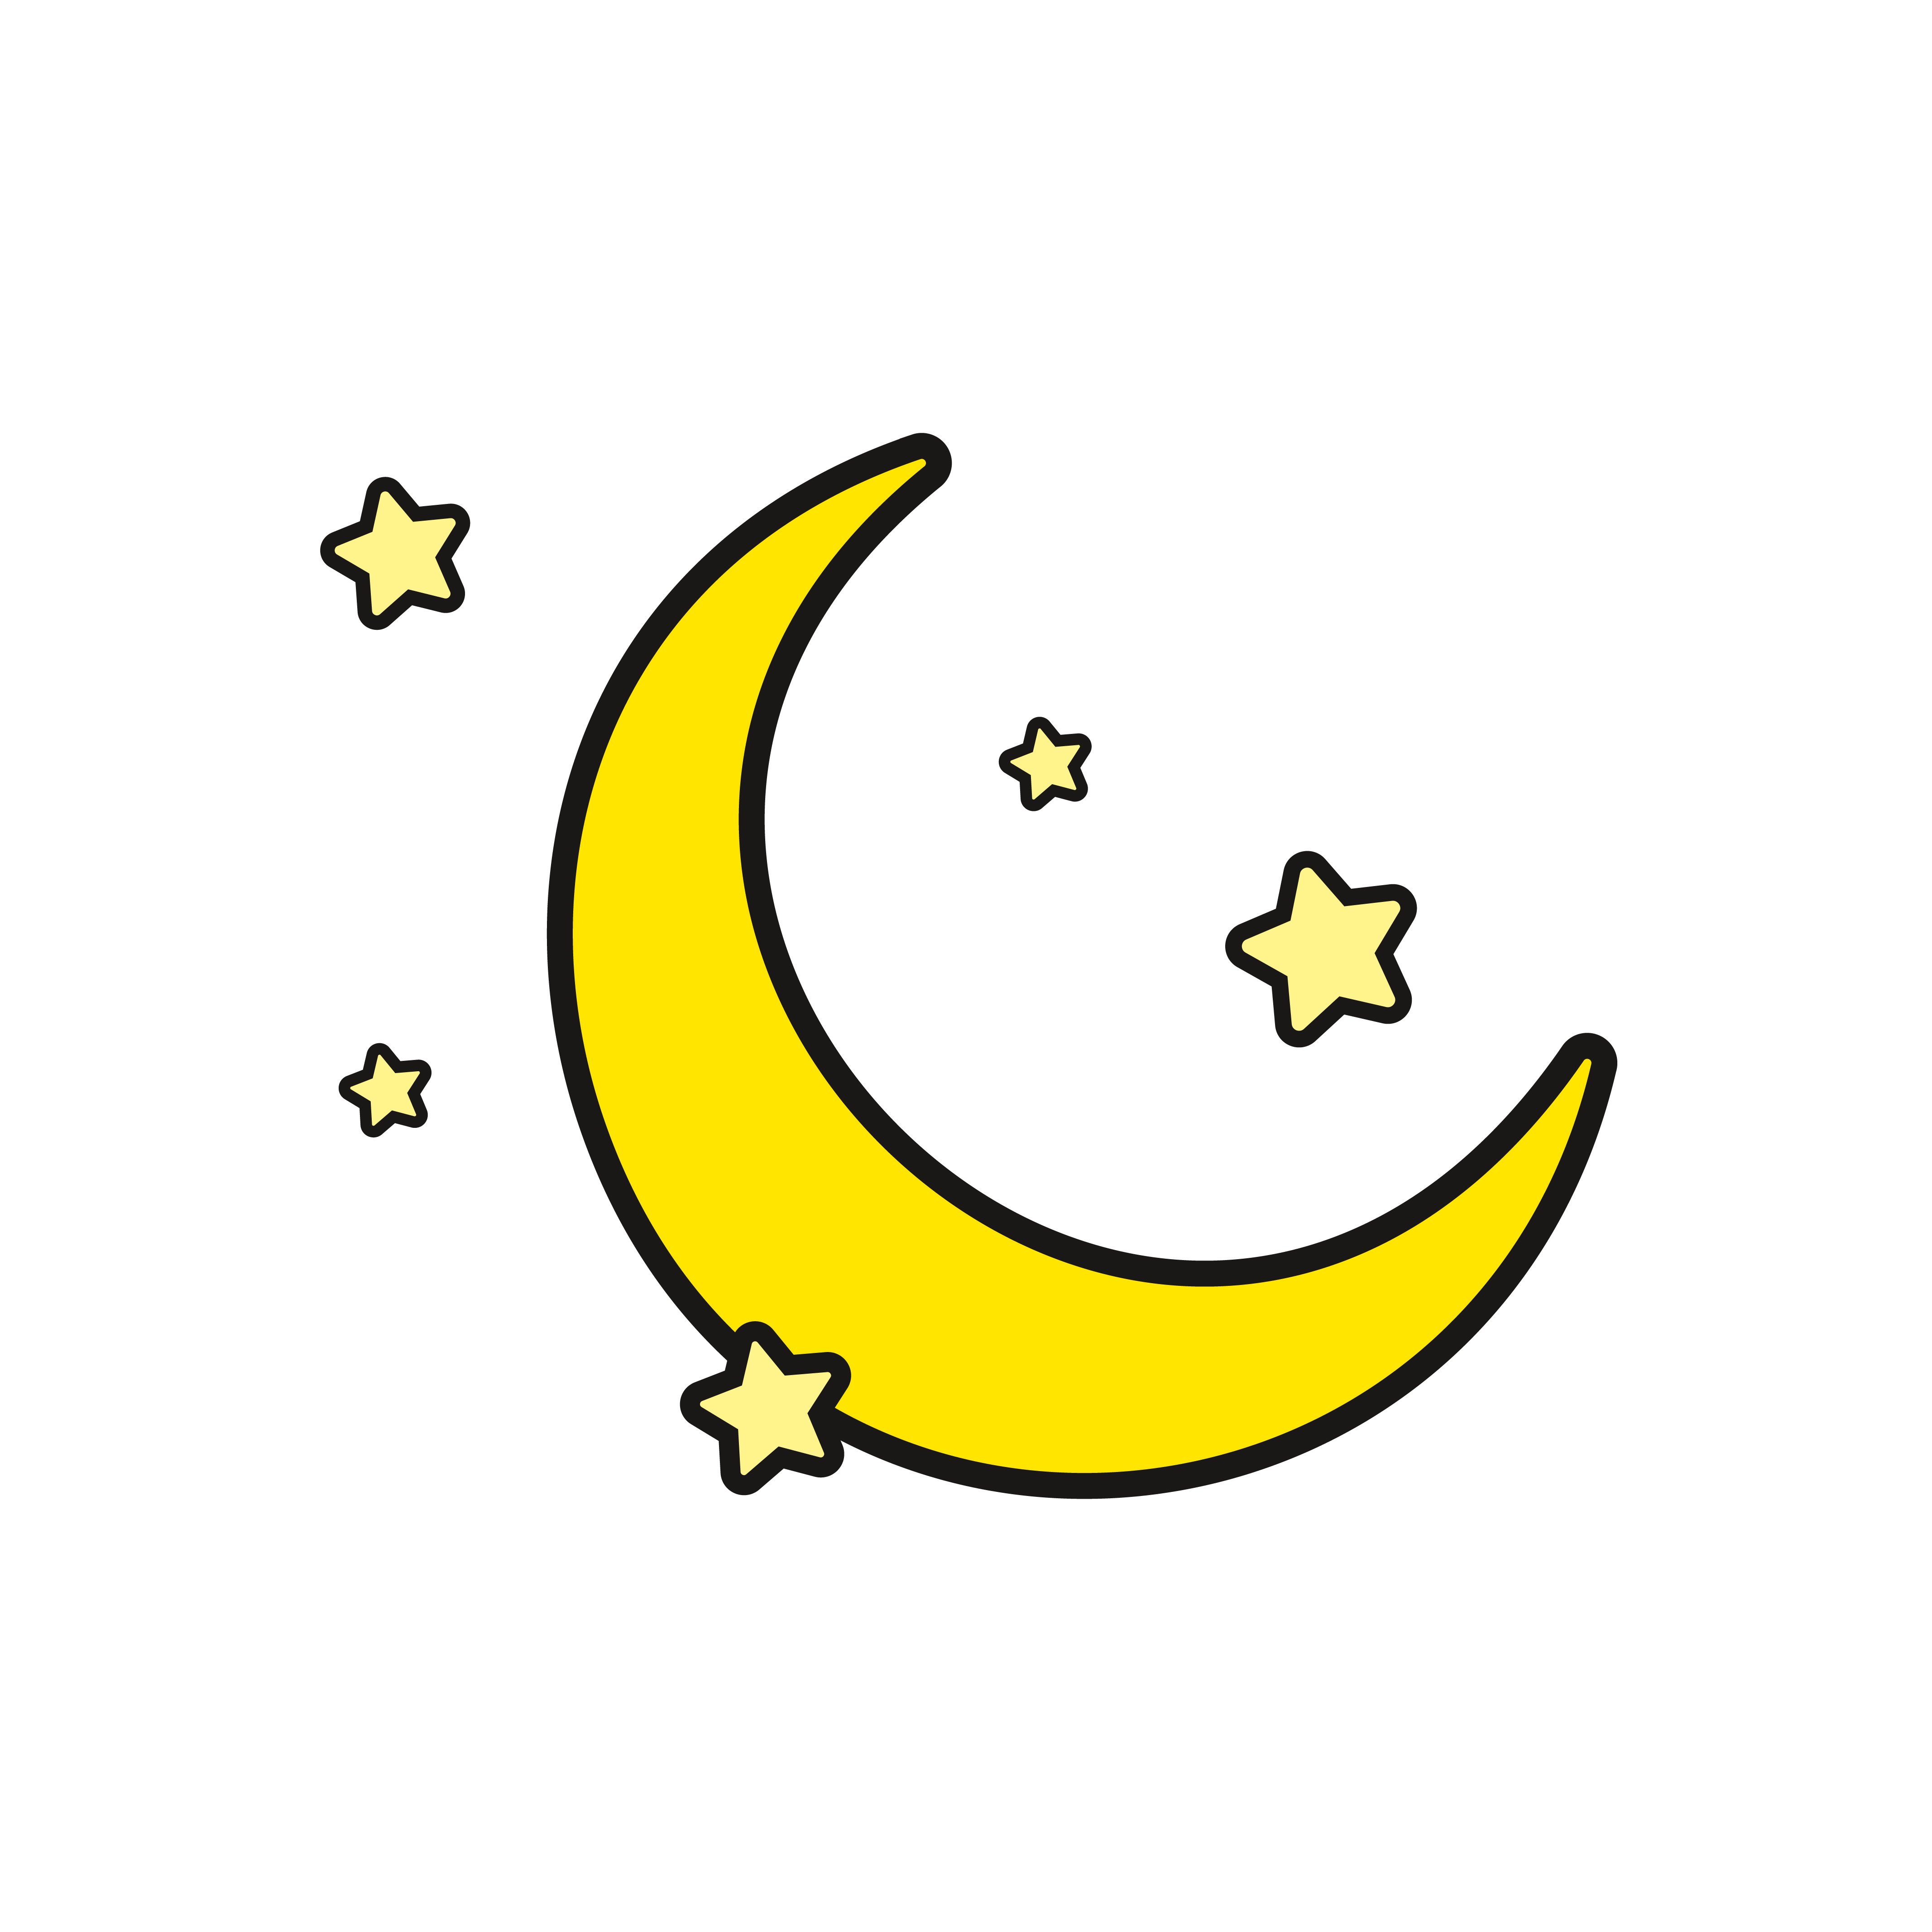 moon and stars clipart free